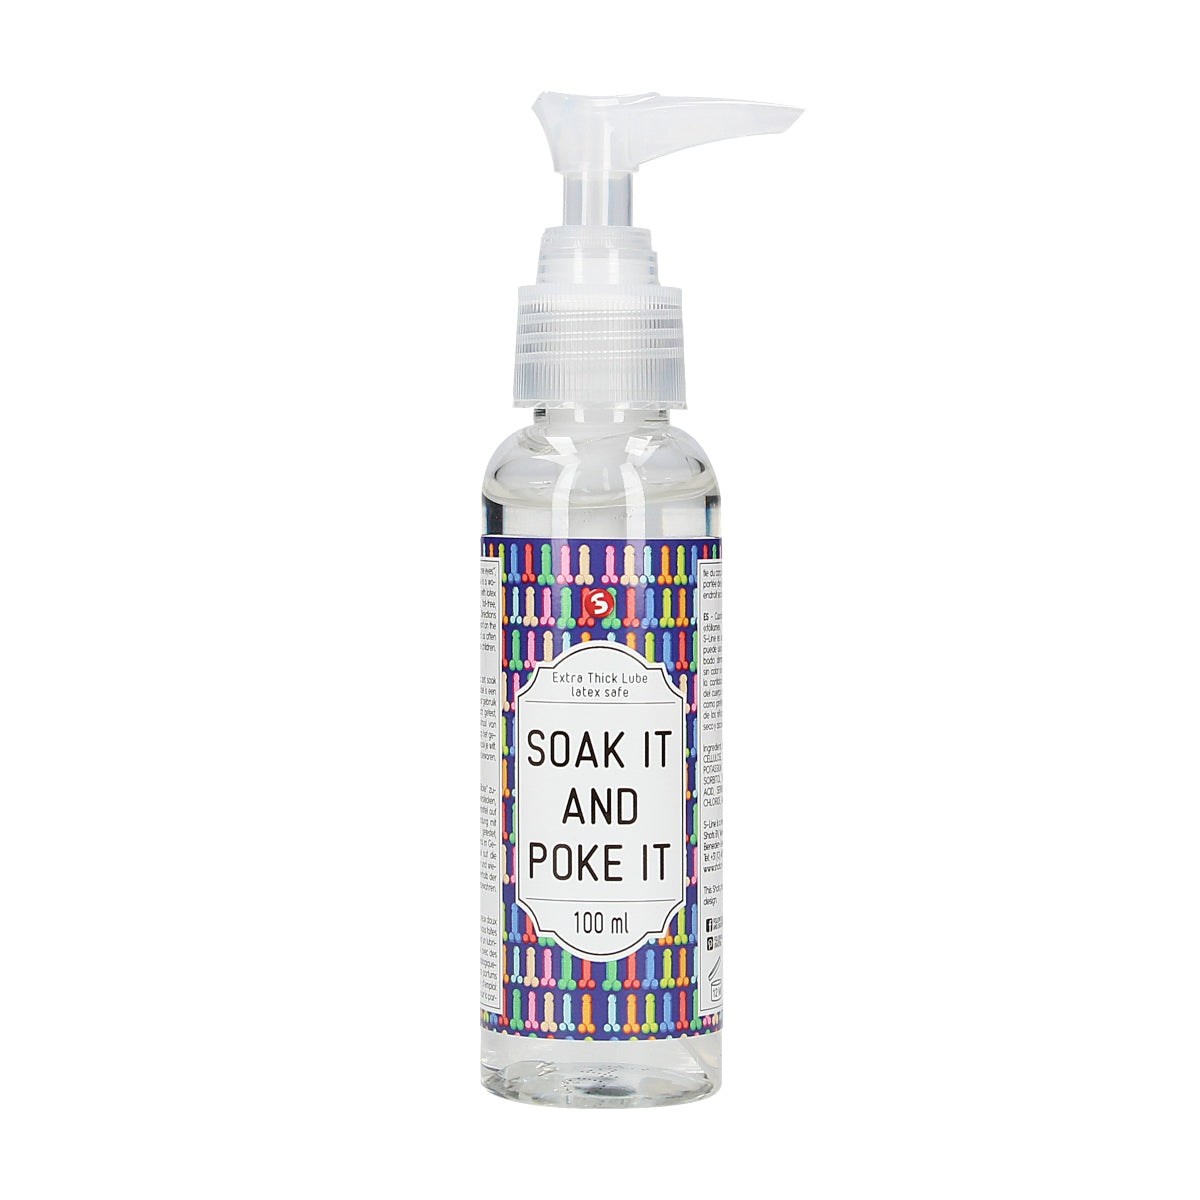 S-Line Soak It And Poke It Extra Thick Water Based Lube 100ml